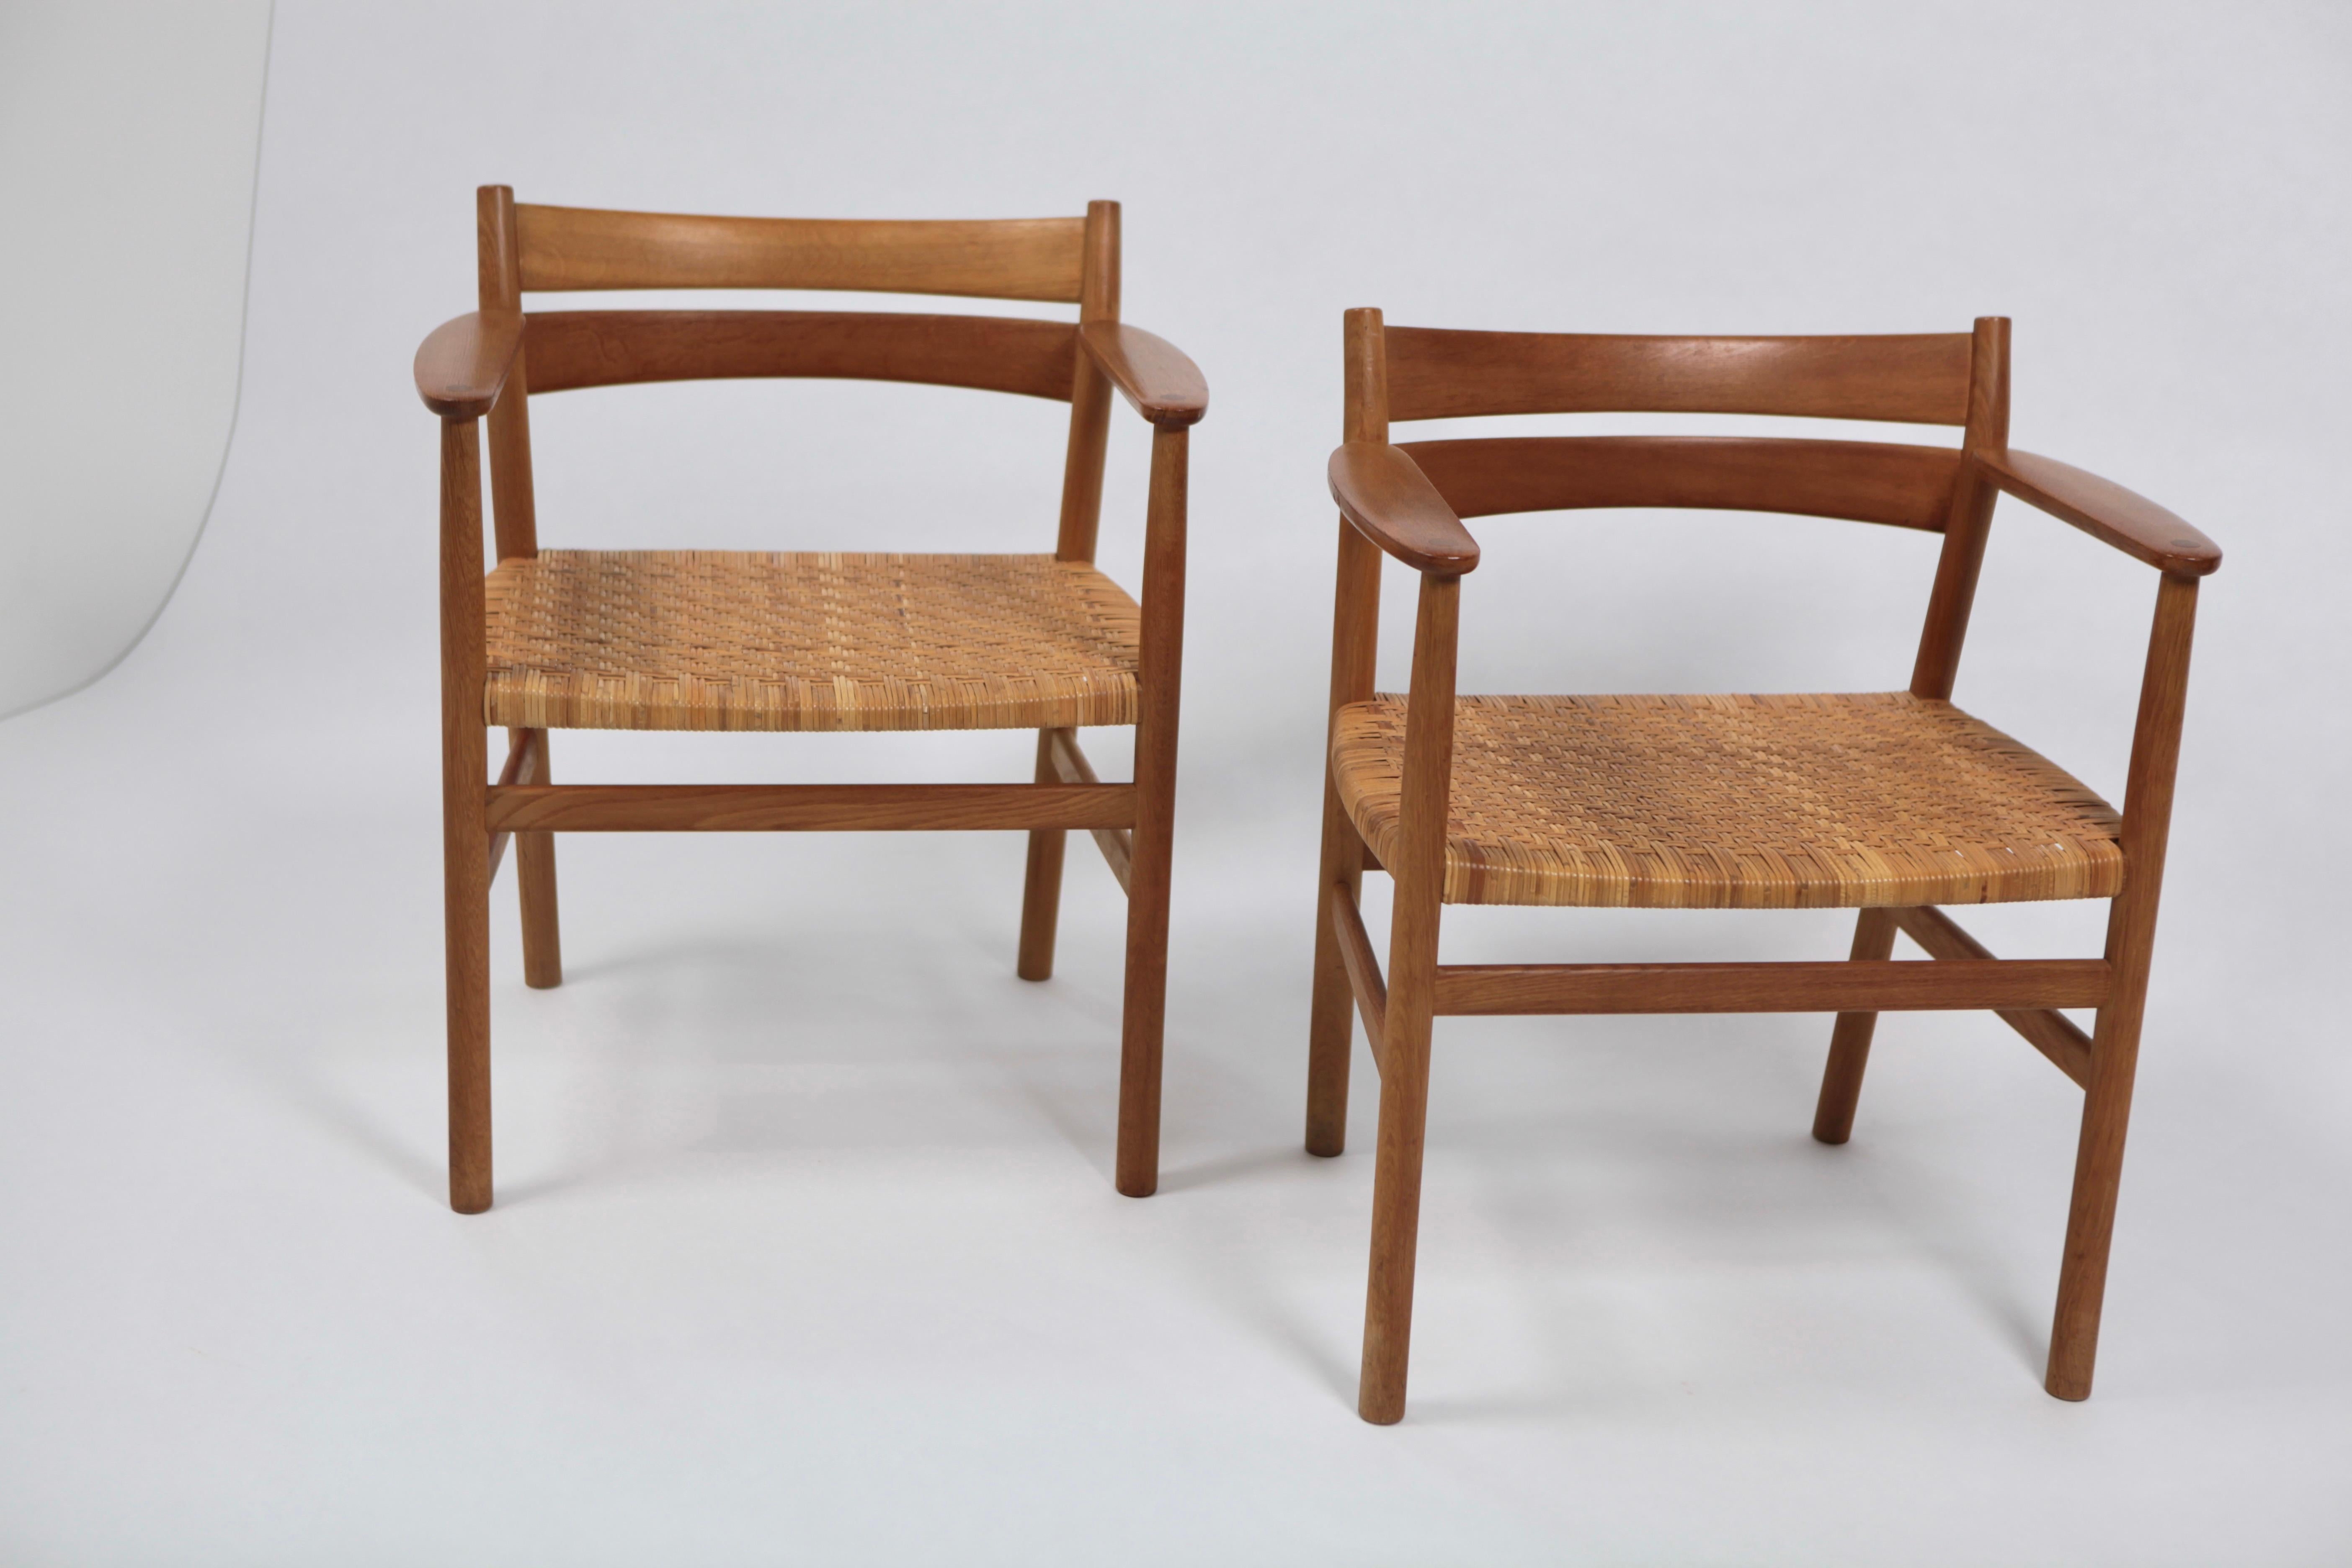 Børge Mogensen, Pair of Rare 'BM1' Armchairs in Oak and Cane, Sweden, 1960s For Sale 3